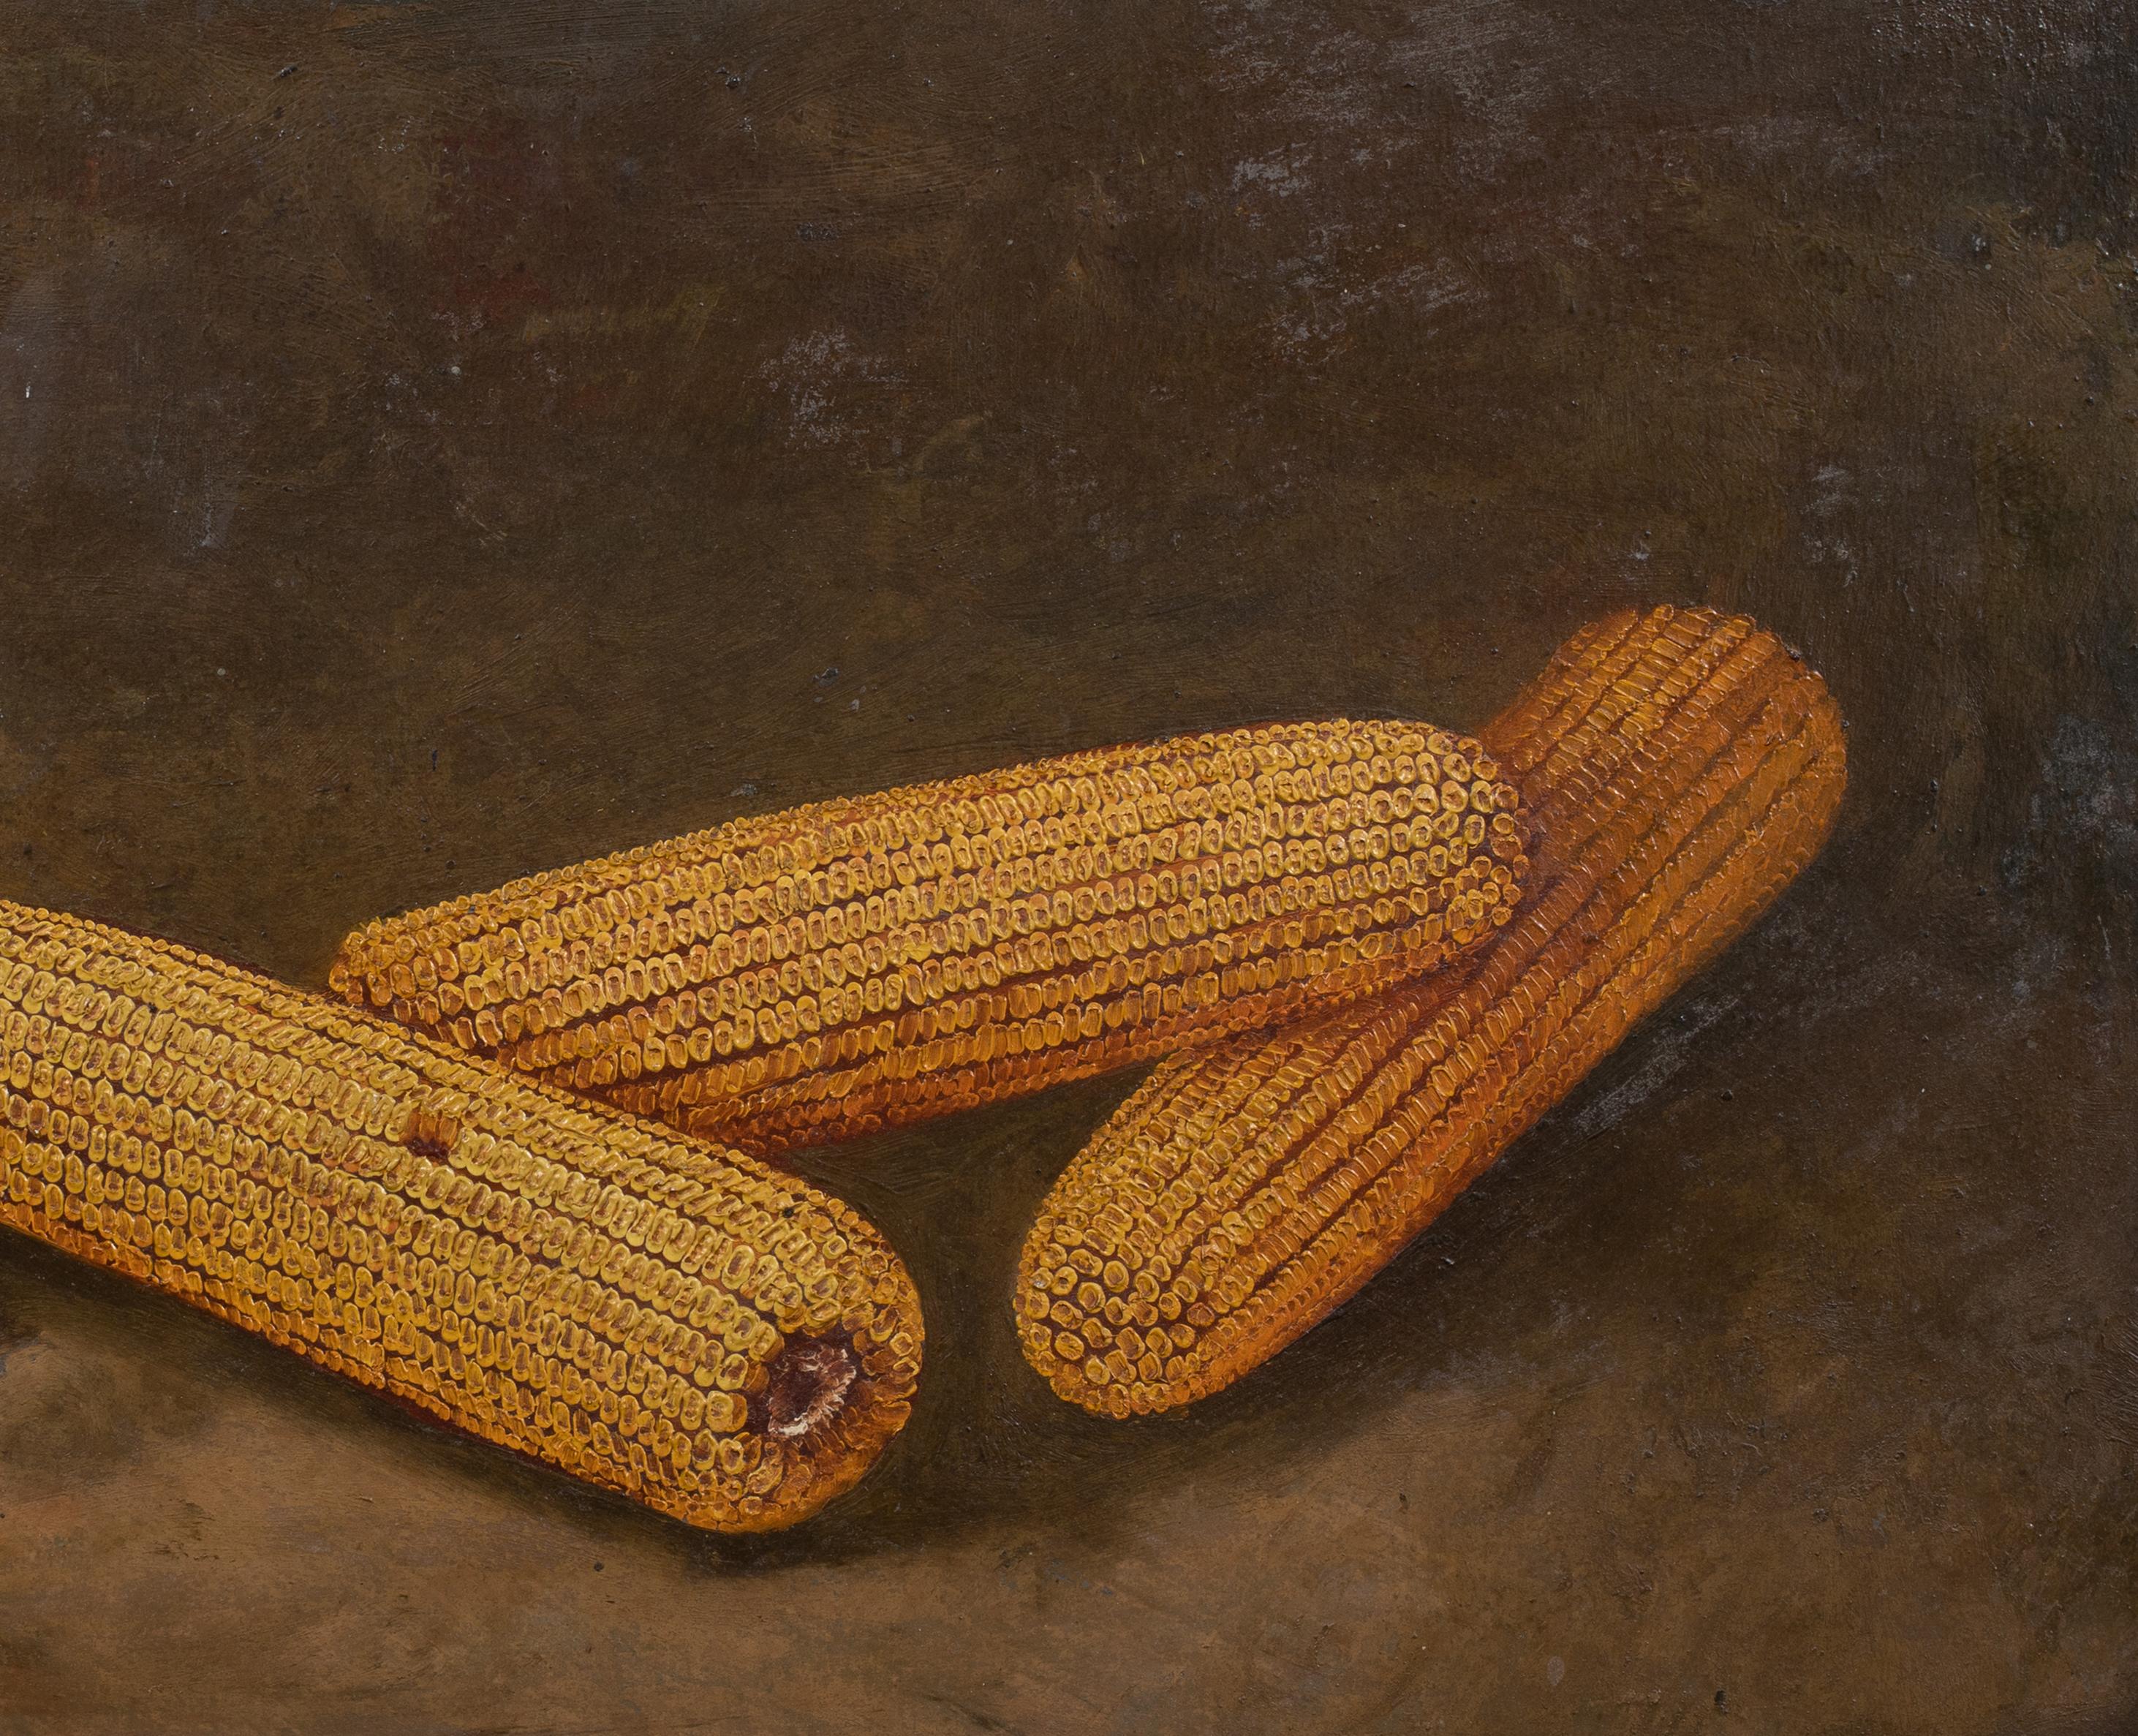 Study of Corn On The Cob

by Alfred Montgomery (1857-1922)

Large 19th Century American still life study of Corn On the Cob, oil on panel by Alfred Montgomery. Excellent quality and condition large scale example of the American painters work famous